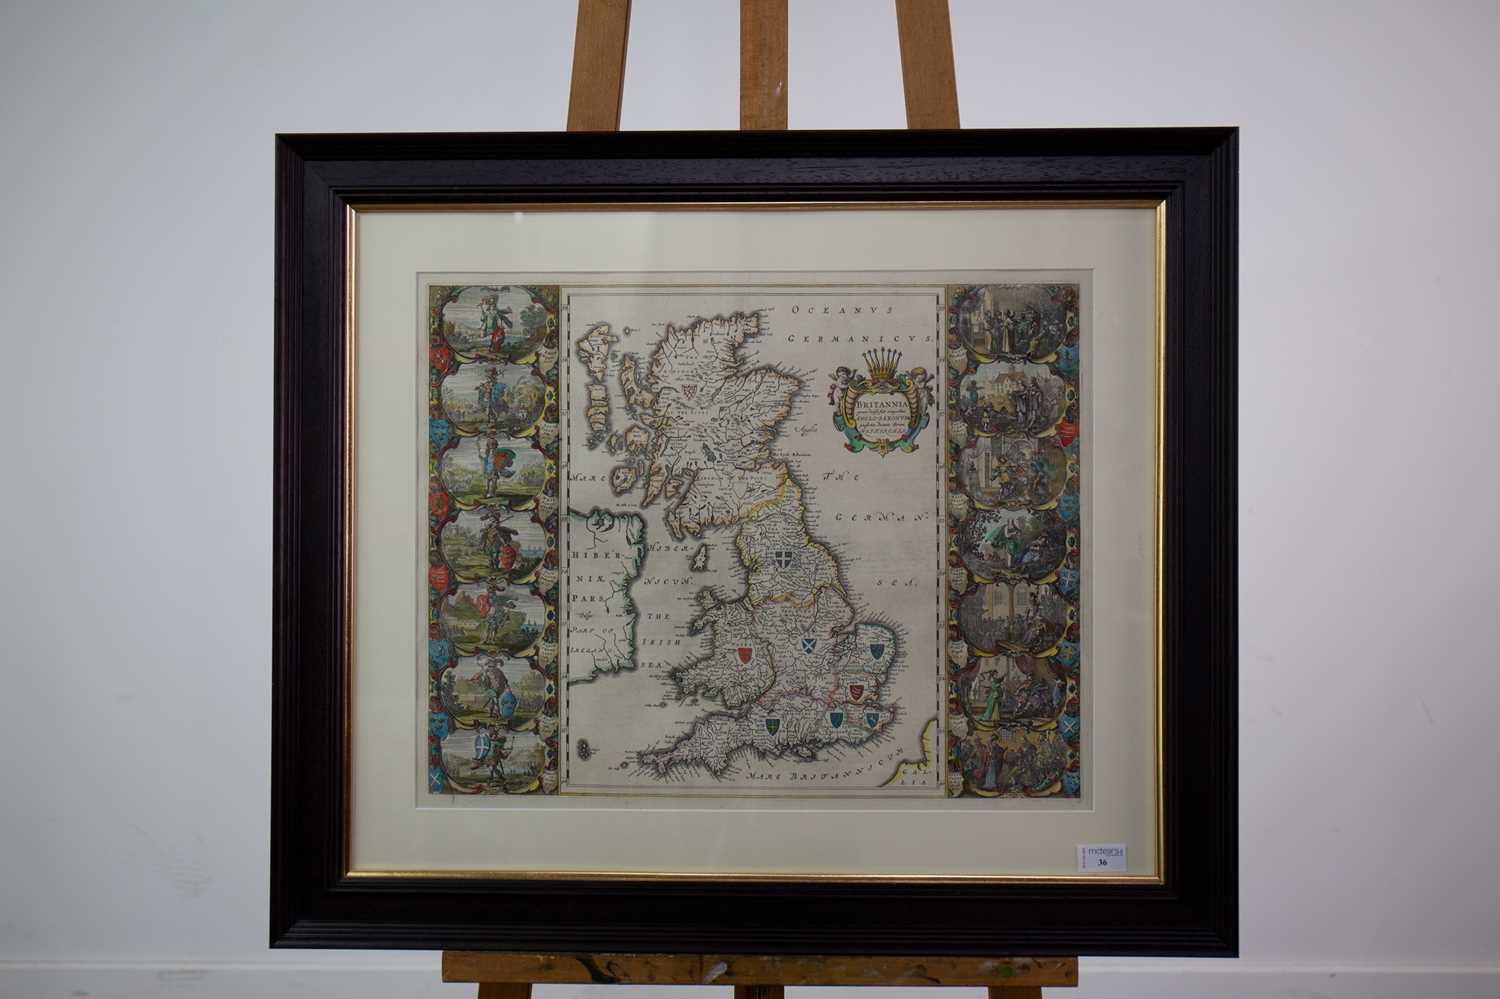 Lot A FINE 17TH CENTURY MAP OF THE ANGLO-SAXON HEPTARCHY